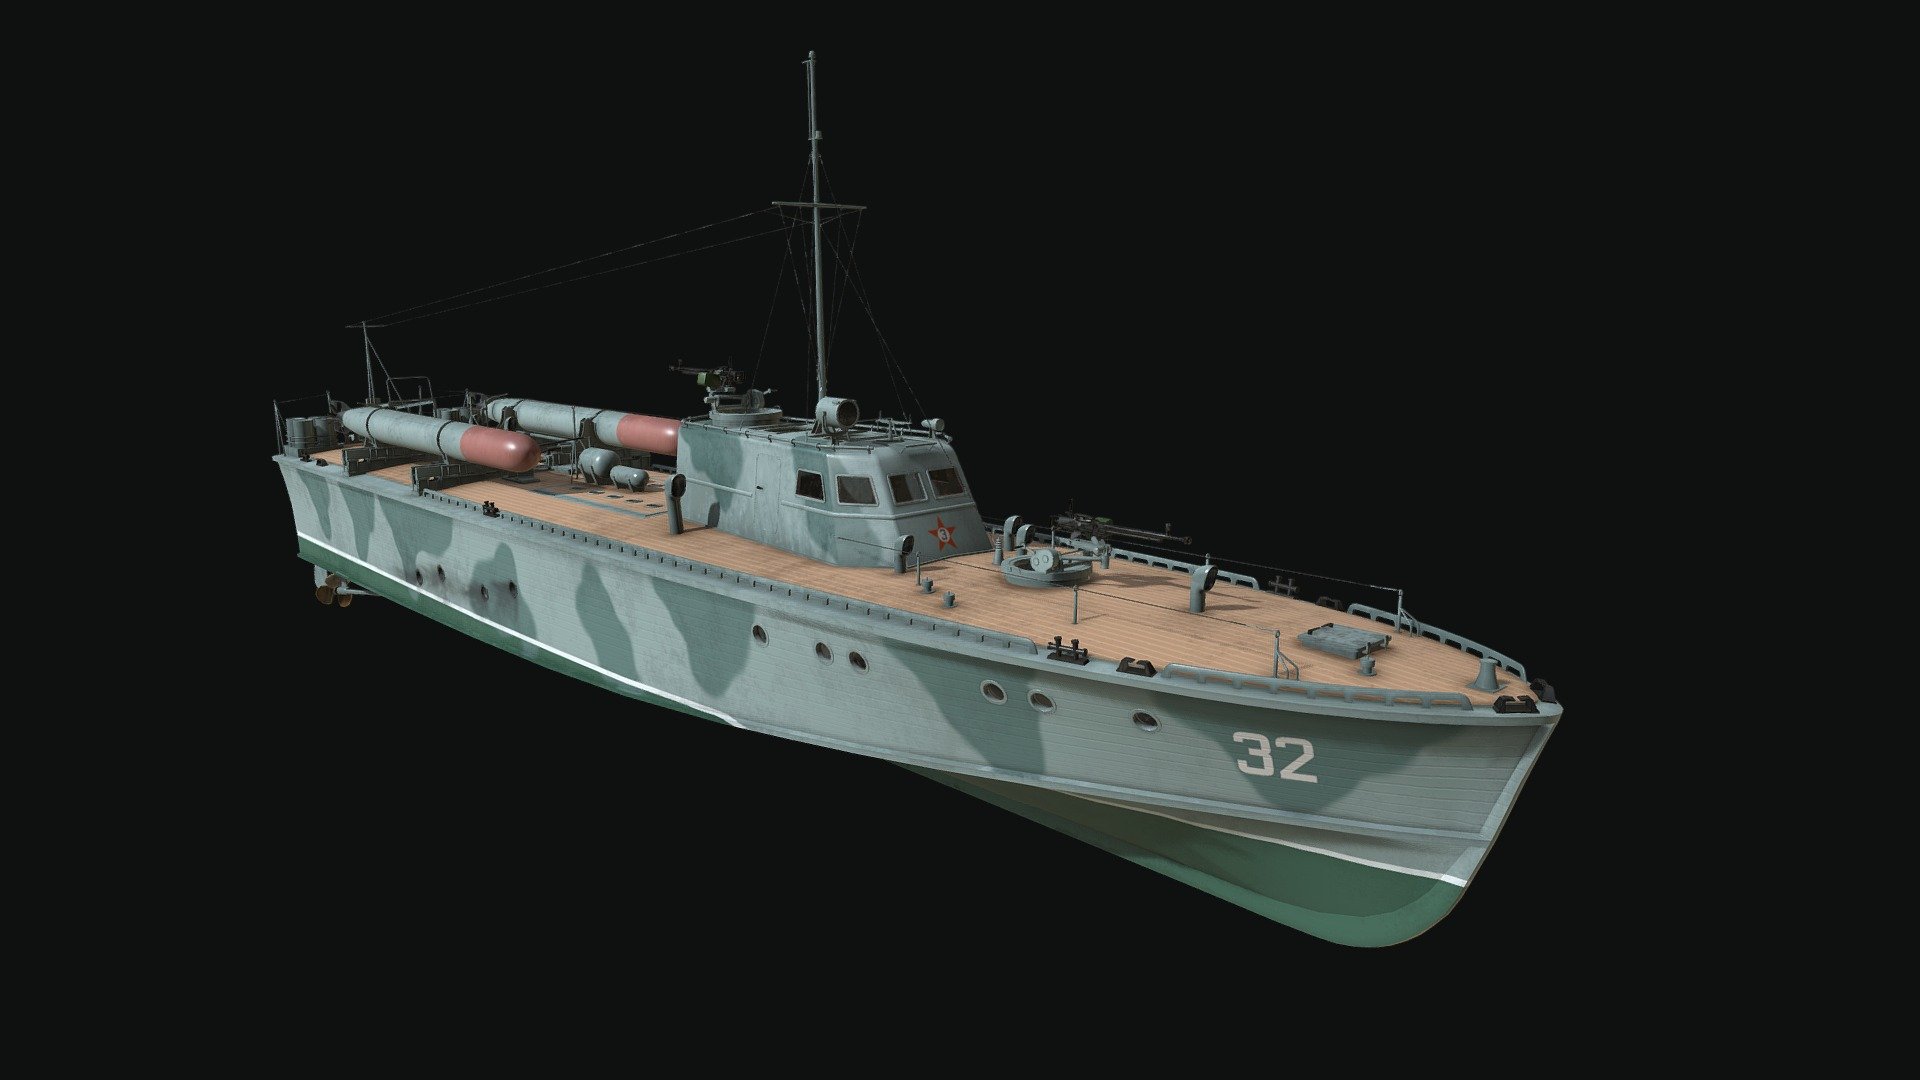 The D-3-class, designated Project P-19, was a class of Soviet wooden motor torpedo boats (MTB) built before and during World War II. The D stands for Derevyanniy. 
The boats were produced in two main series. The 1941 series with 26 boats built between possessed a noticeable lower speed 32 knots (59 km/h; 37 mph), and the 1943 series with 47 boats built that could reach up to 47–48 knots (87–89 km/h; 54–55 mph) thanks to lend-lease Packard engines 3d model